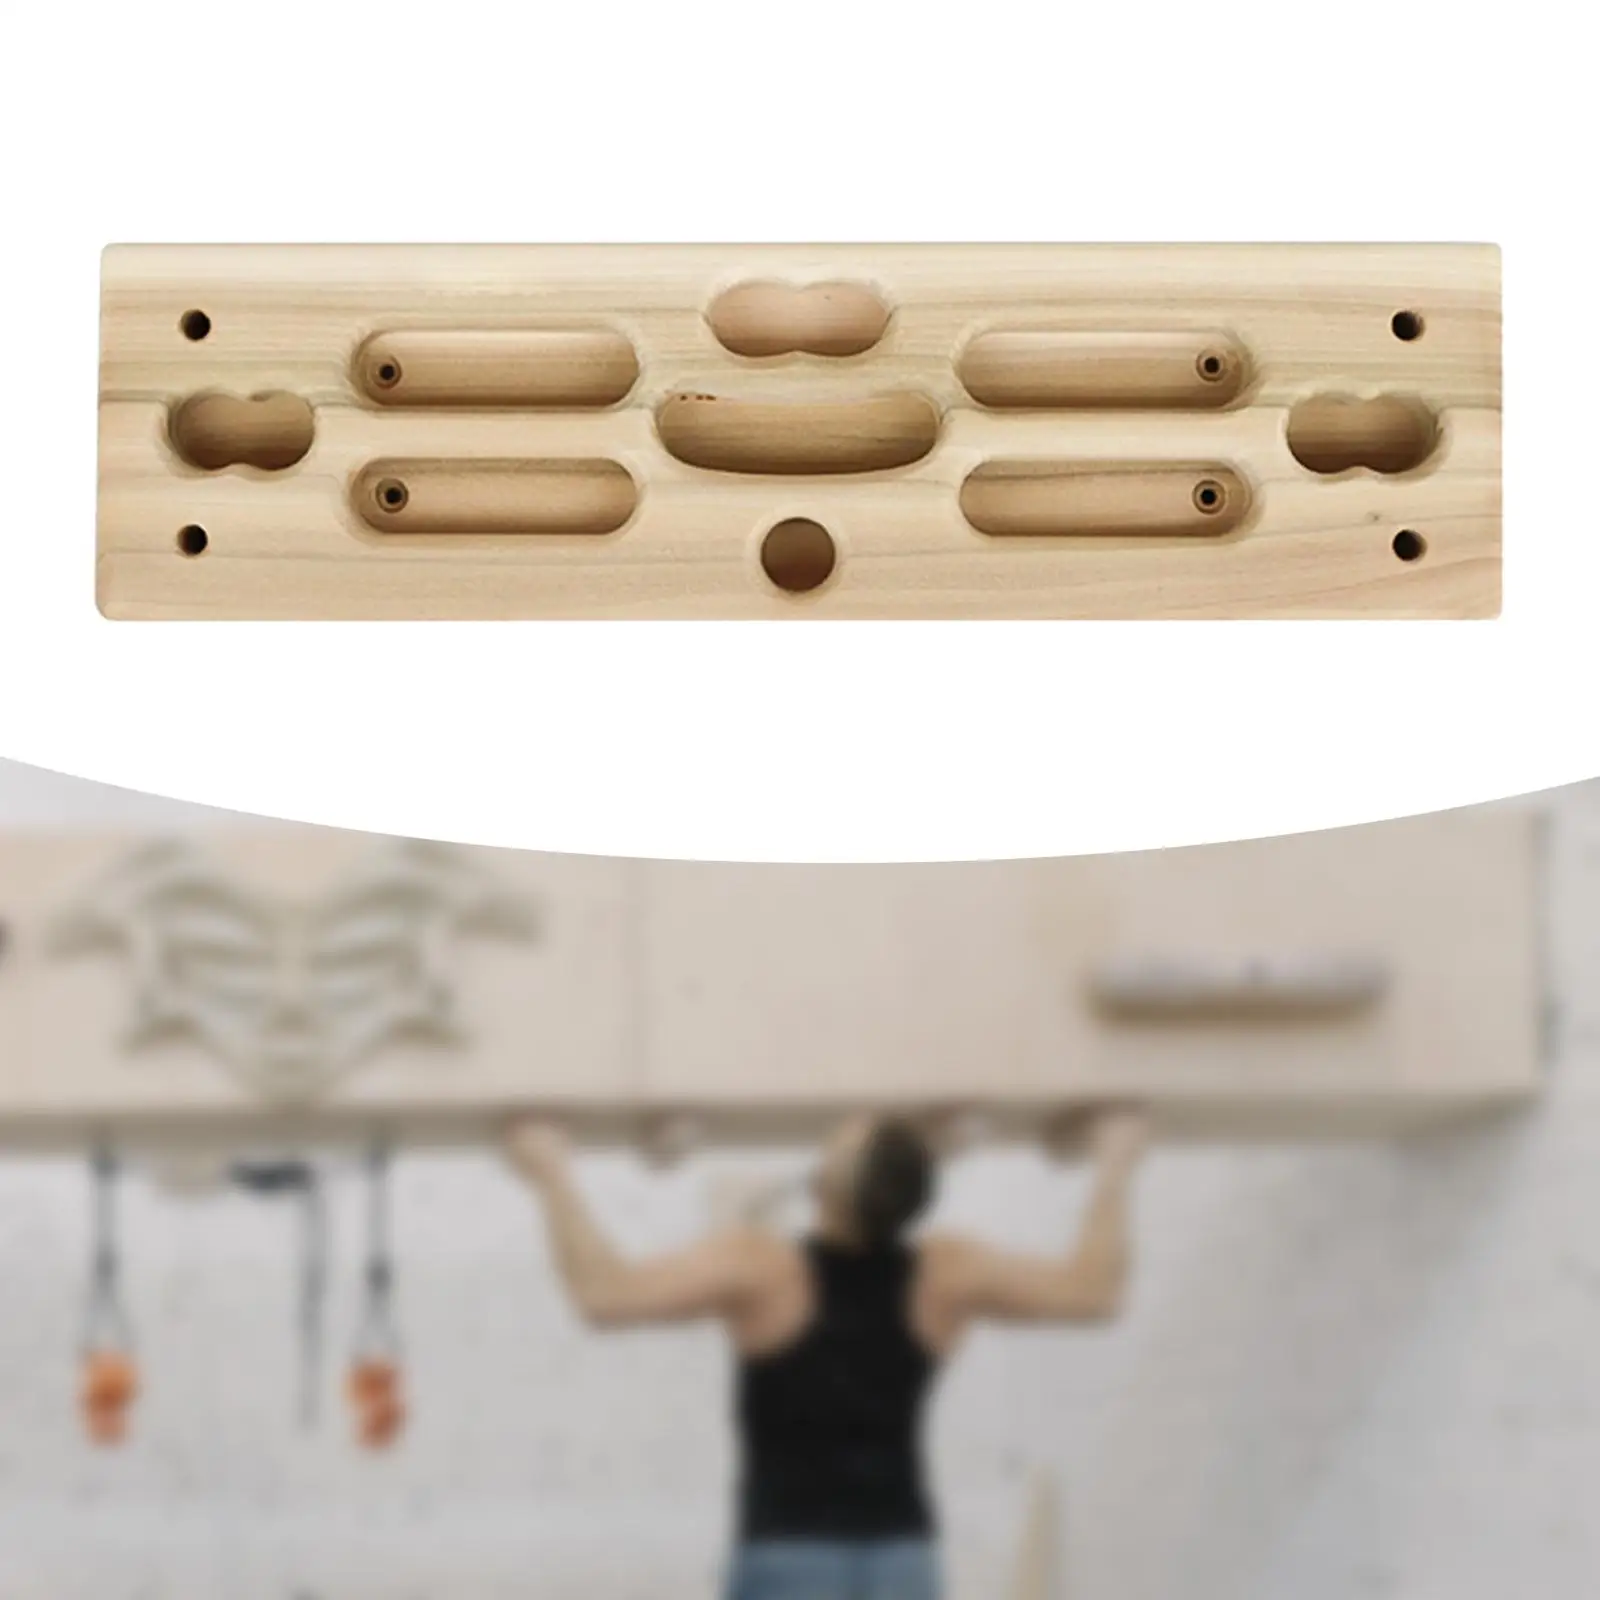 Climbing Hangboard Training Aid Hang Board for Athletes Climbers Bouldering